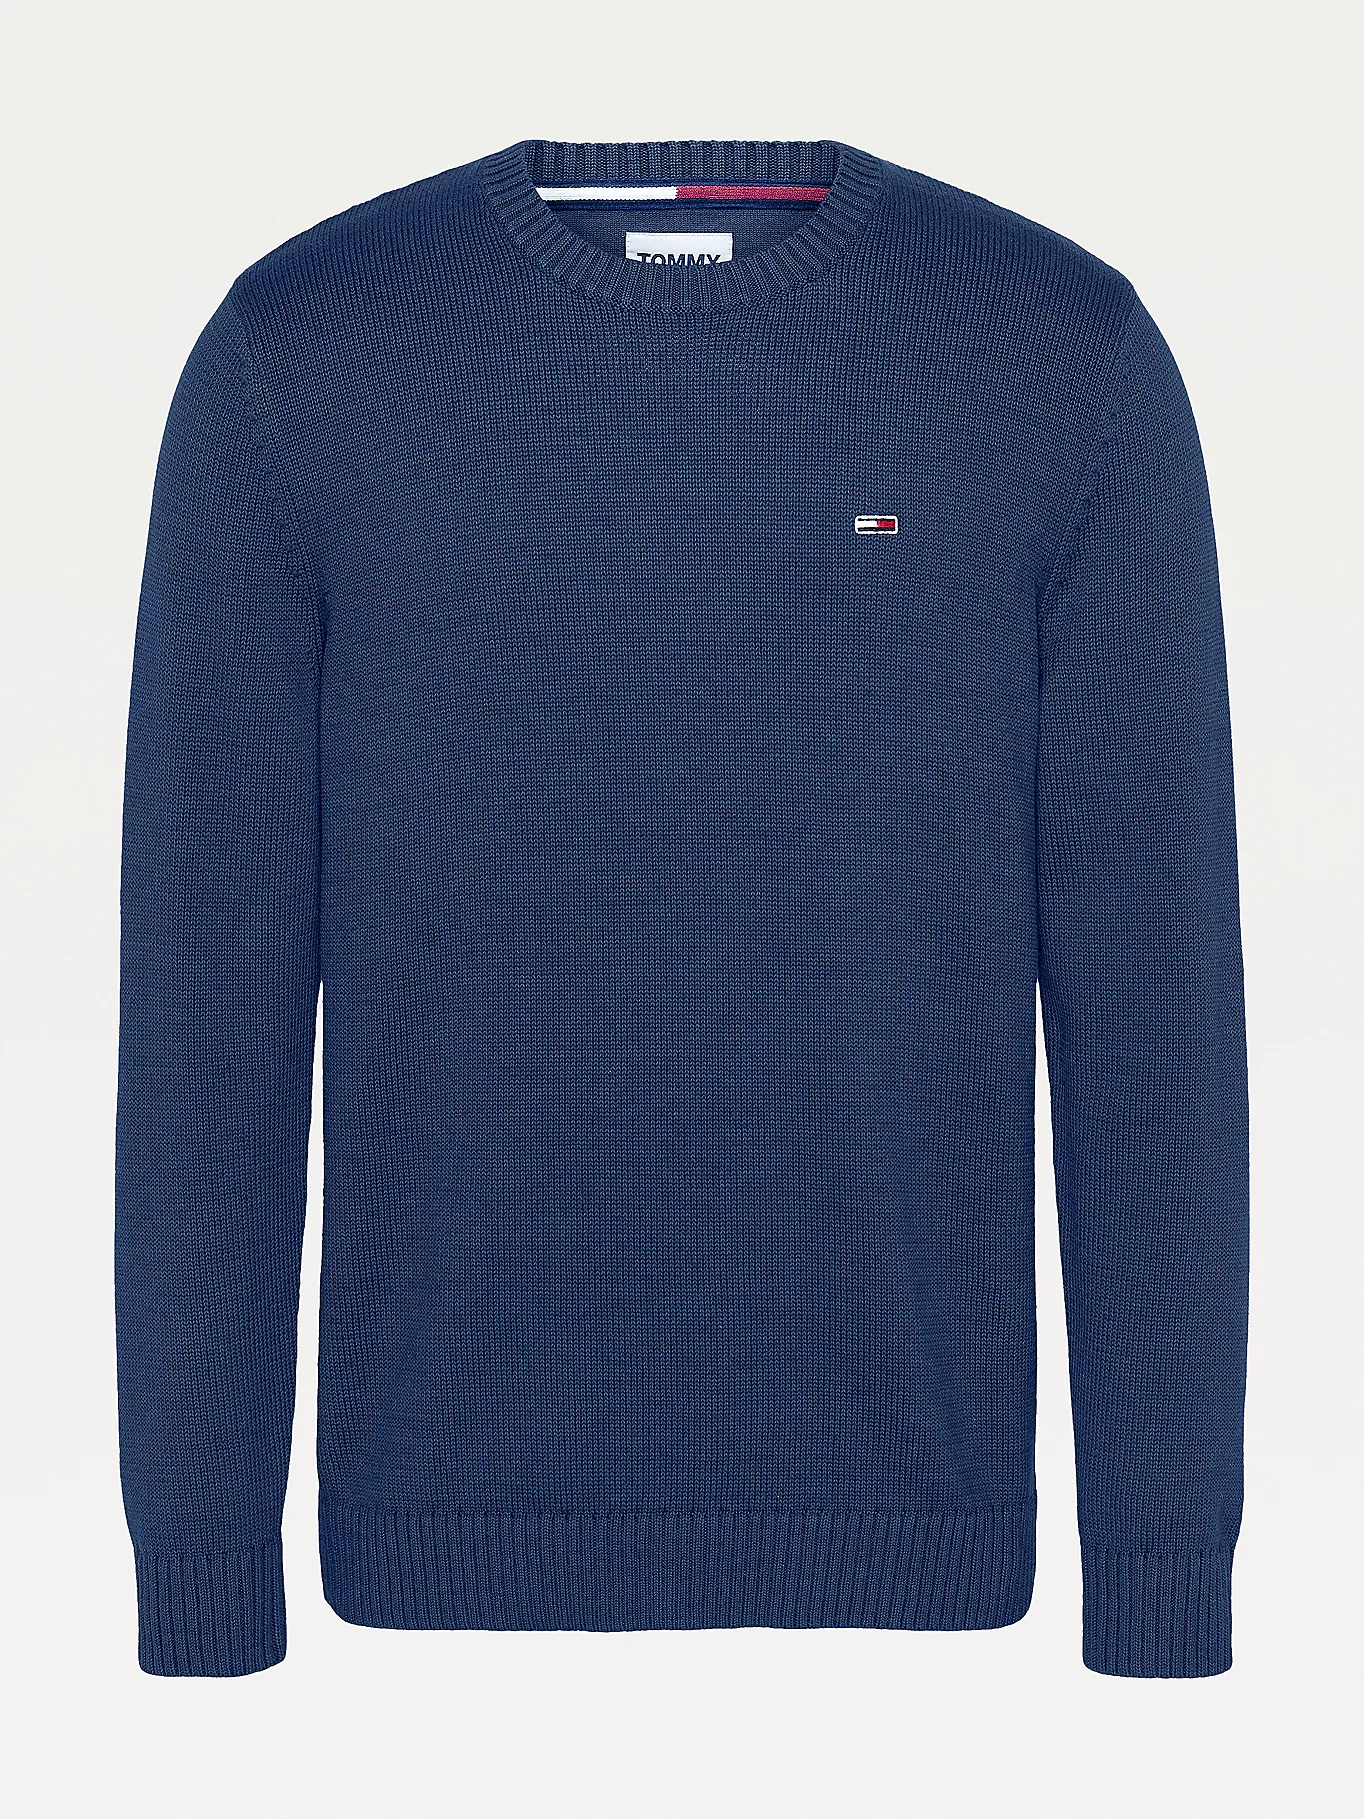 Neck Fashion Scandinavian Buy - Jeans Twilight Navy Essential Store Tommy Crew